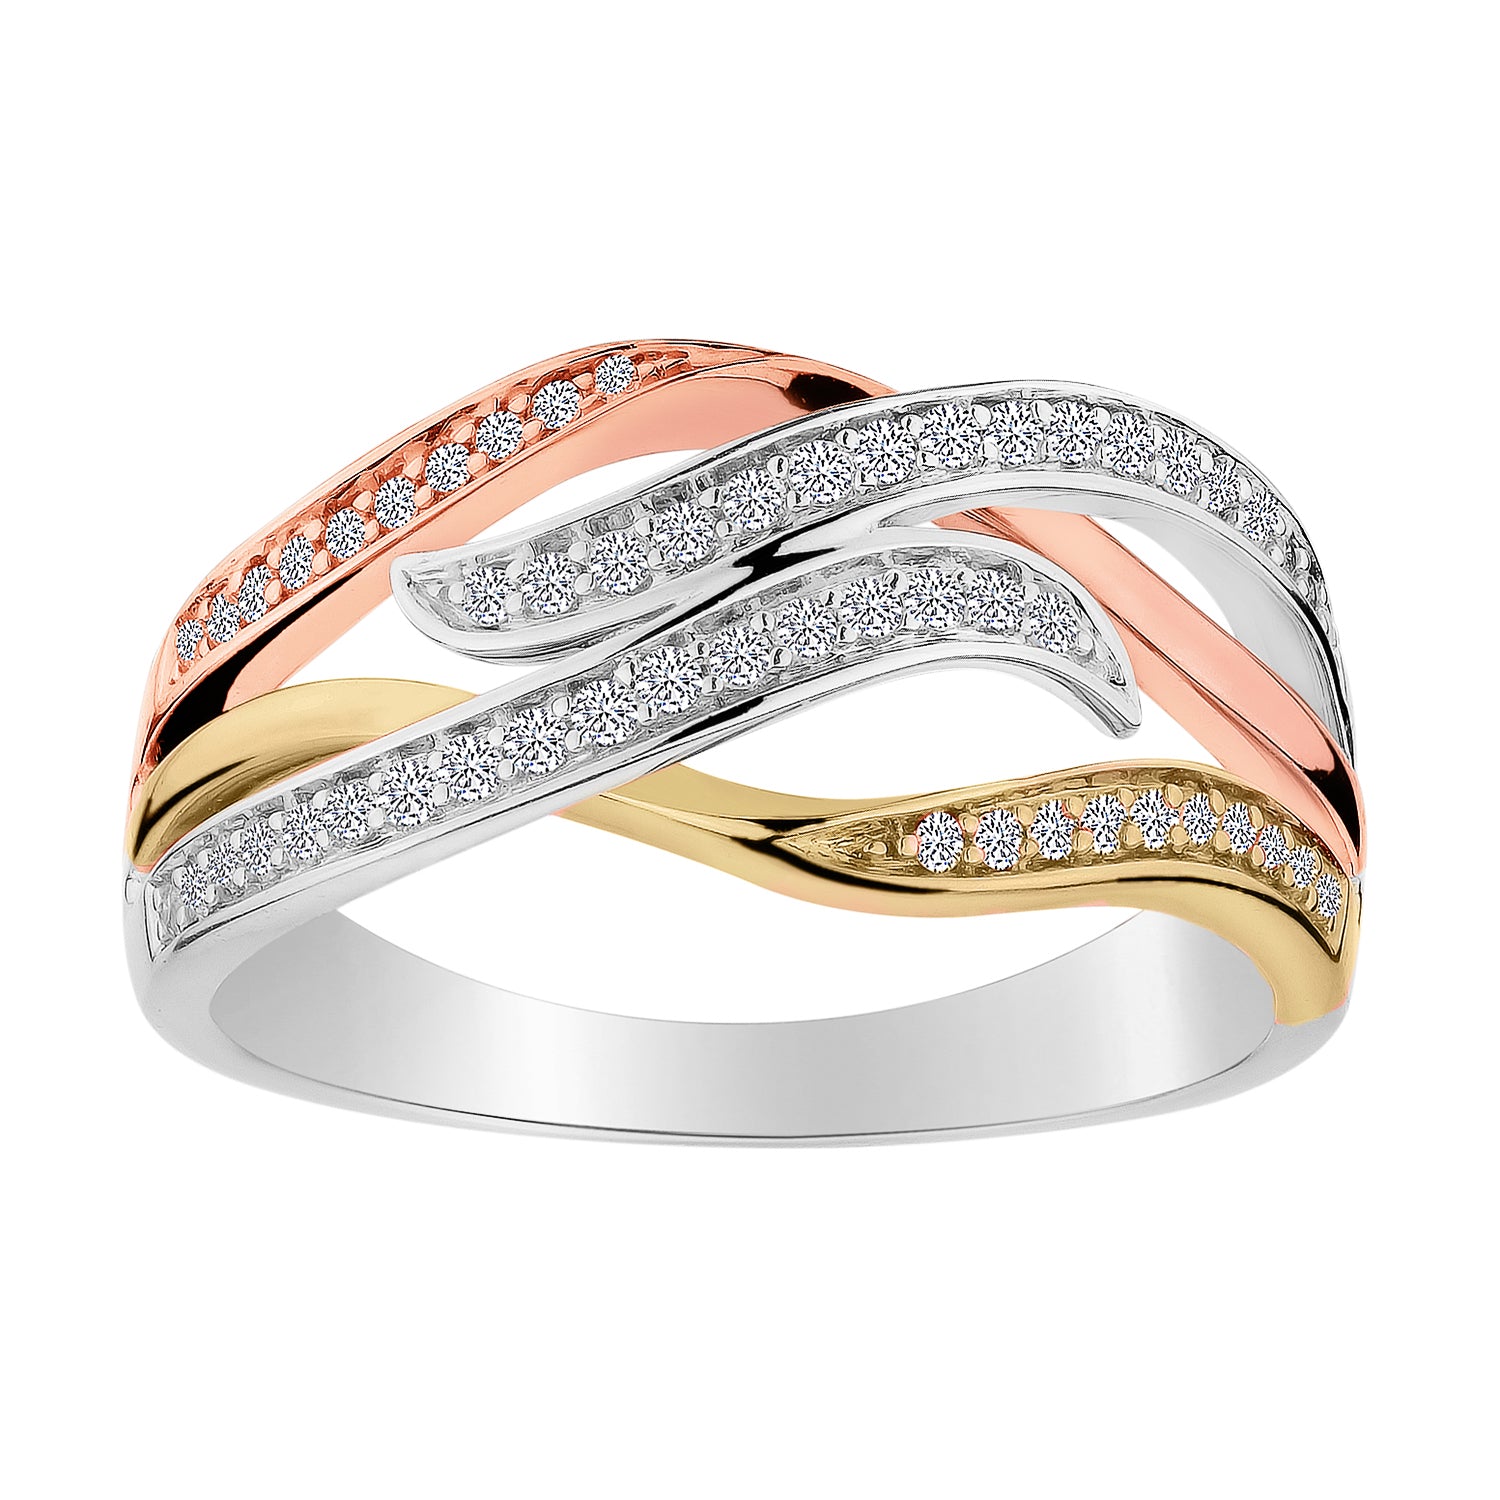 .25 CARAT DIAMOND RING, 10kt WHITE, YELLOW AND ROSE GOLD (TRI-COLOUR)....................NOW - Griffin Jewellery Designs